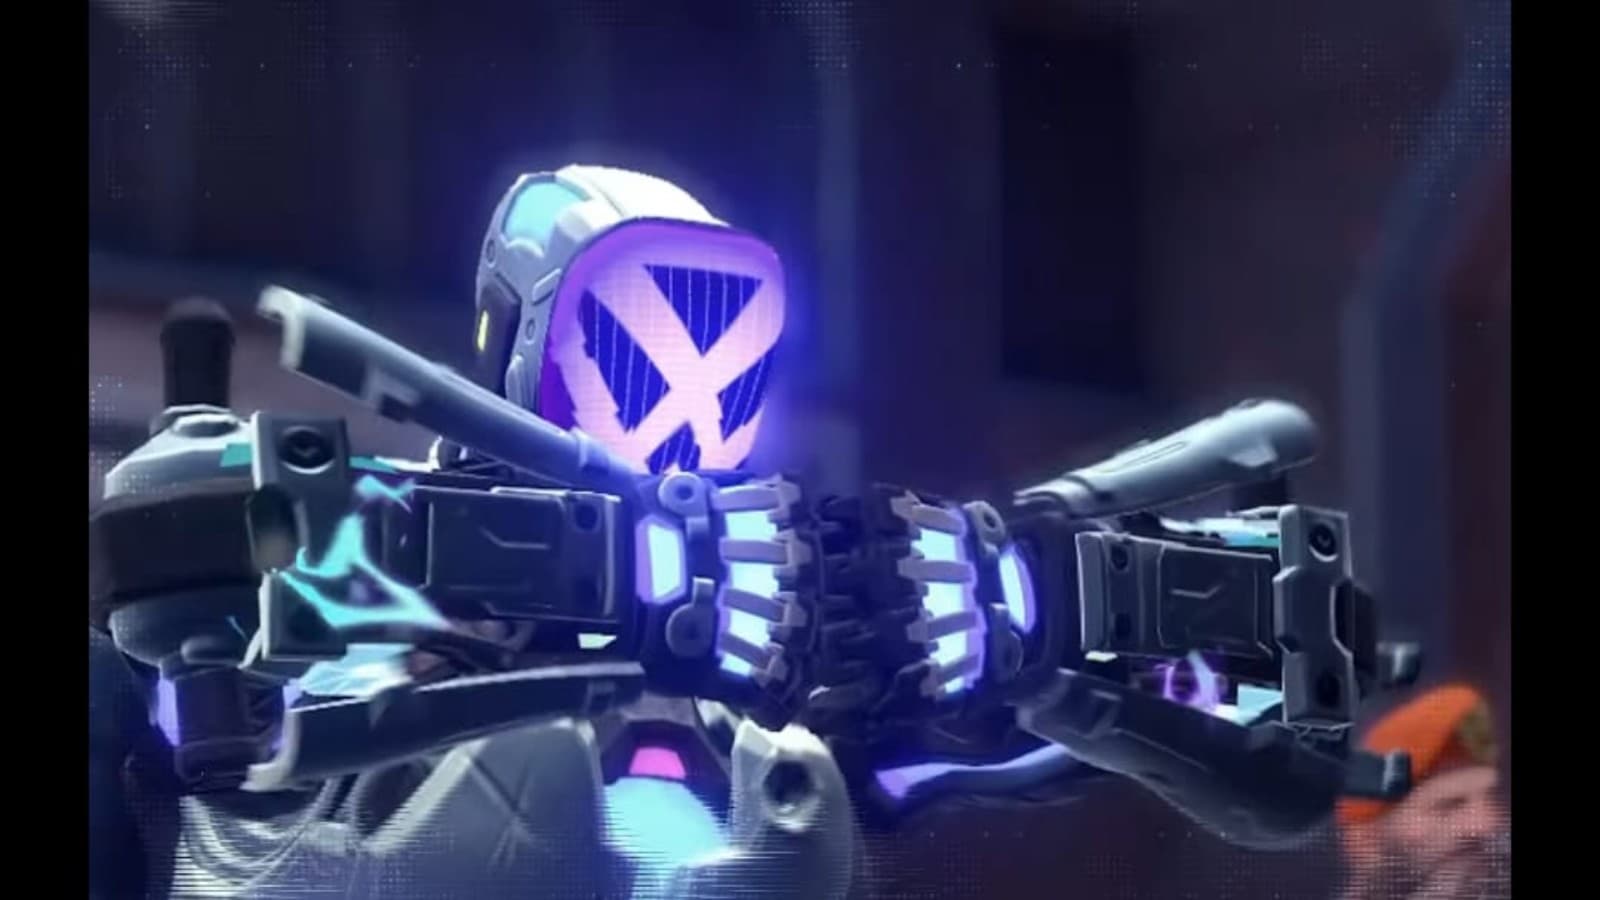 Valorant Presents KAY O, A Killer Robot With The Ability To Mute Opponent Abilities